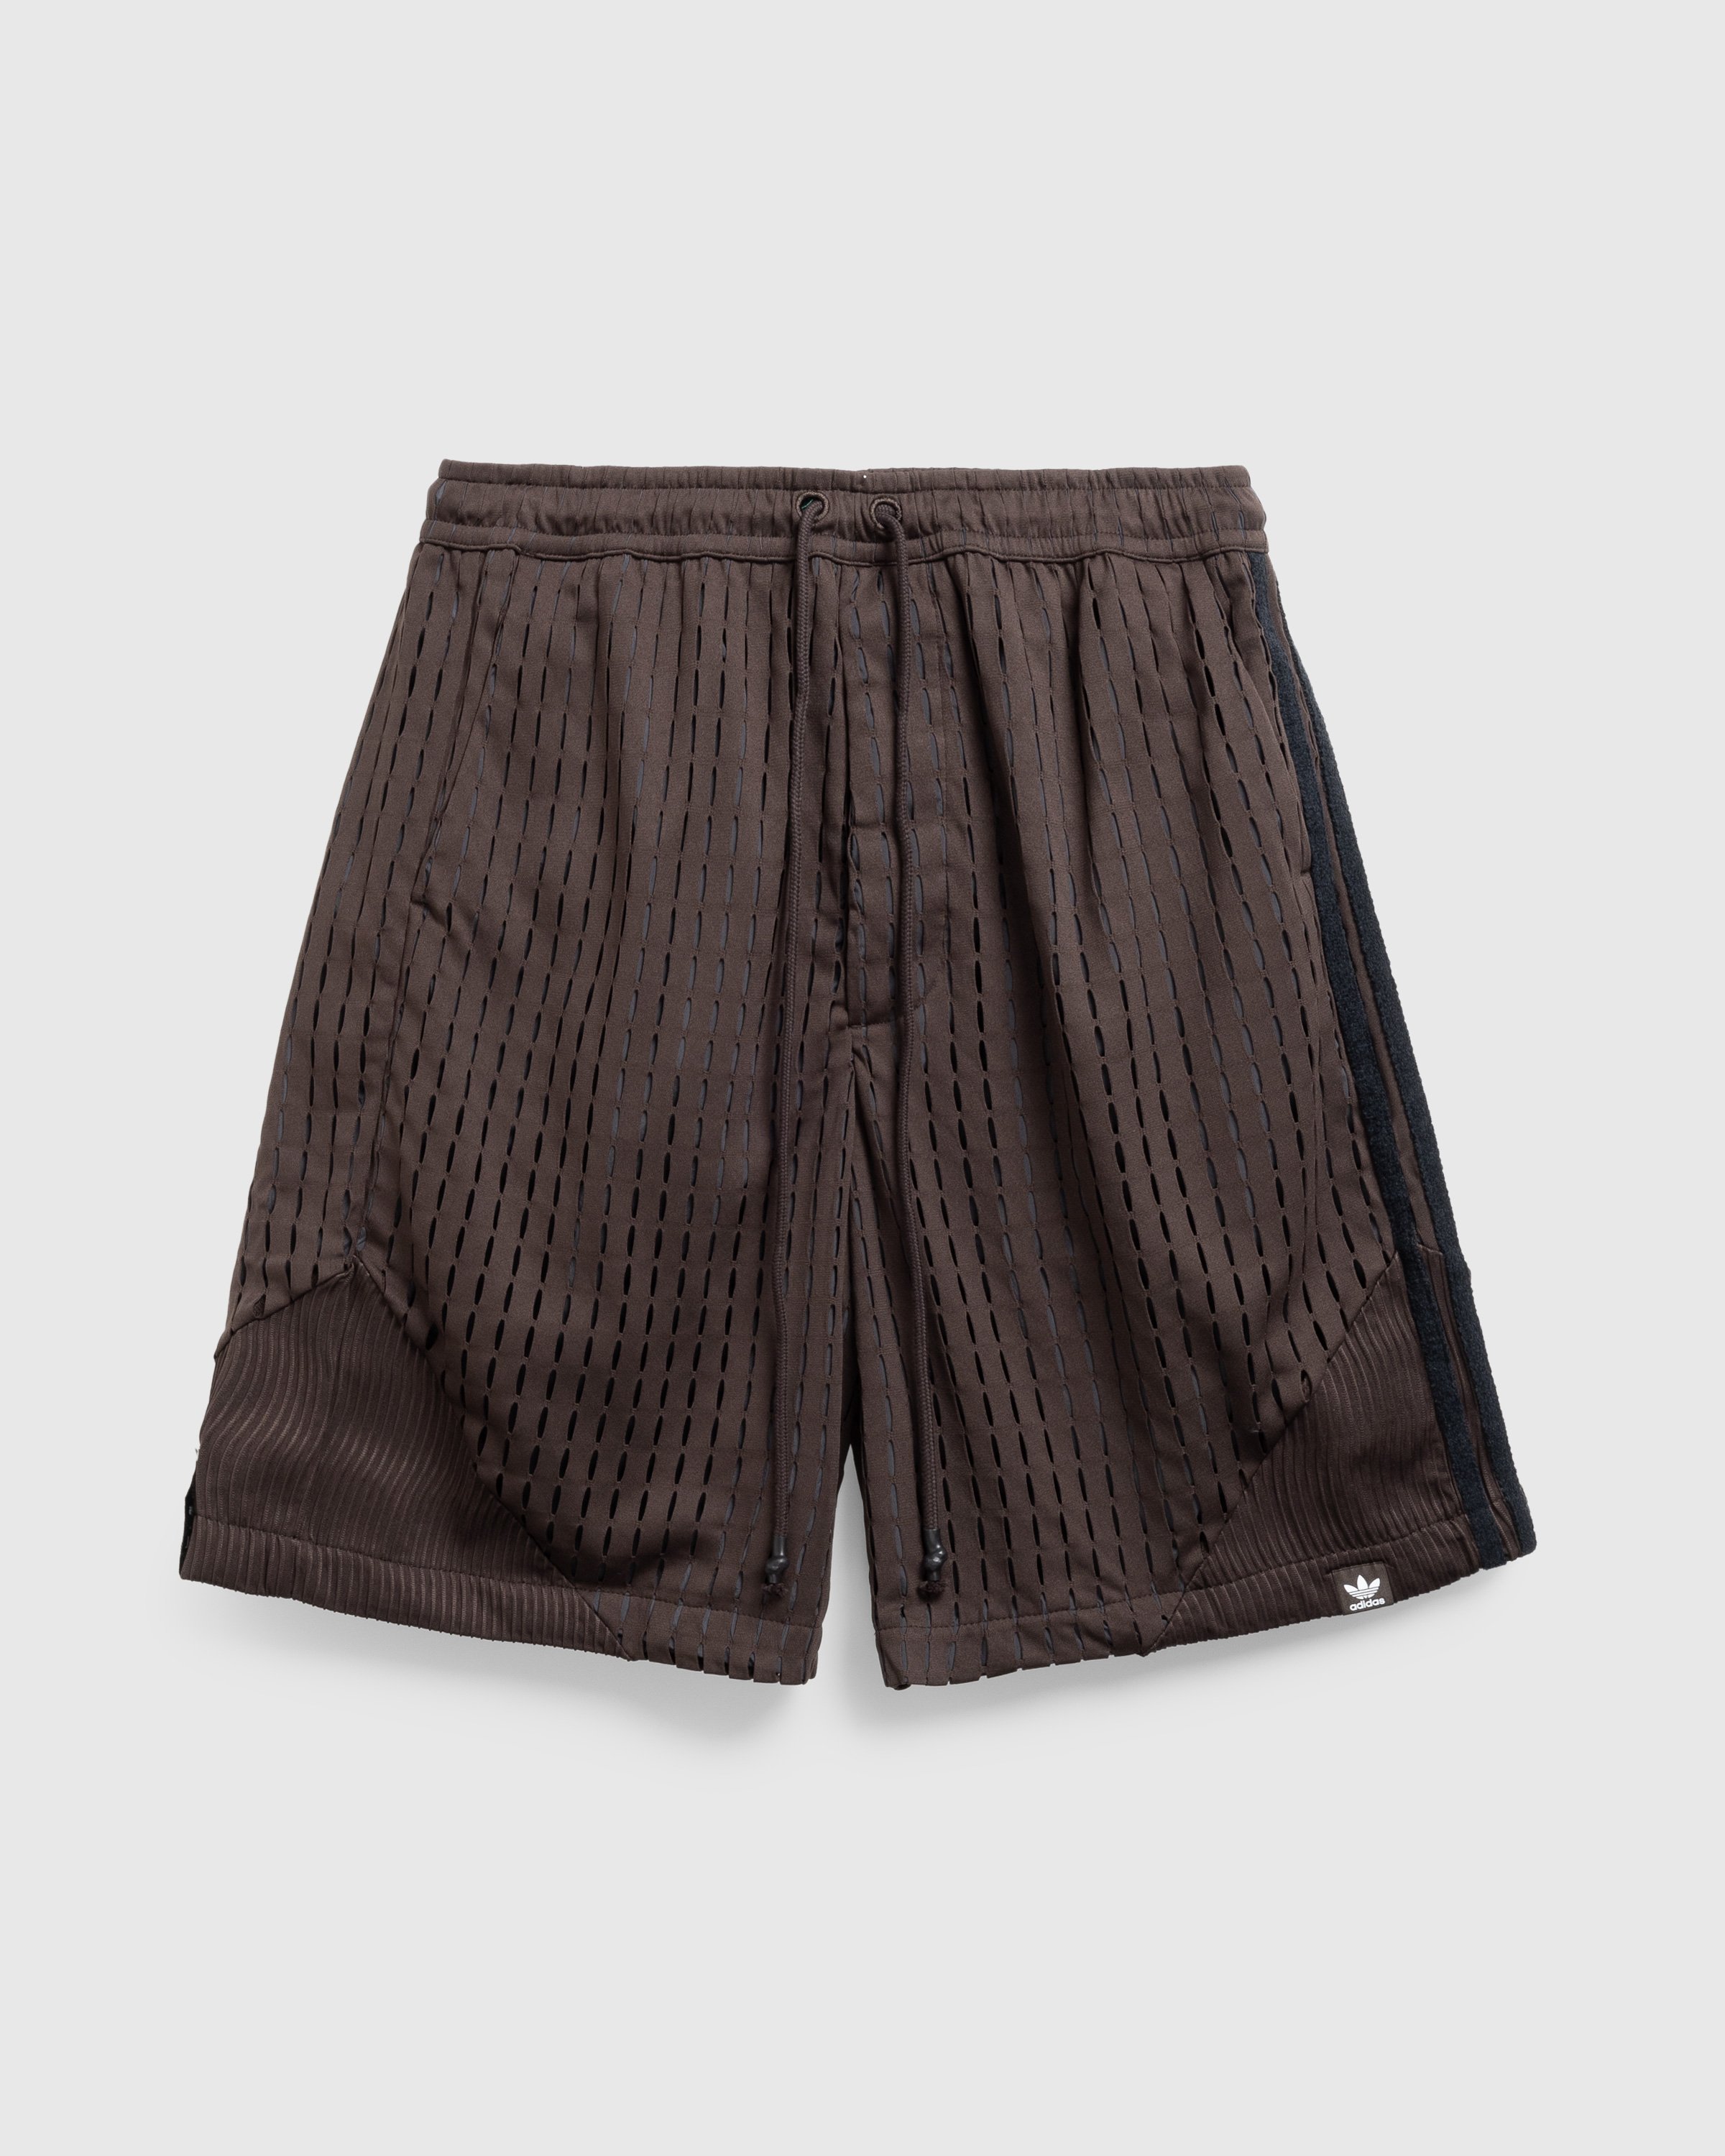 Song For The Mute x Adidas - SFTM SHORT DBROWN/DBROWN - Clothing - Brown - Image 1